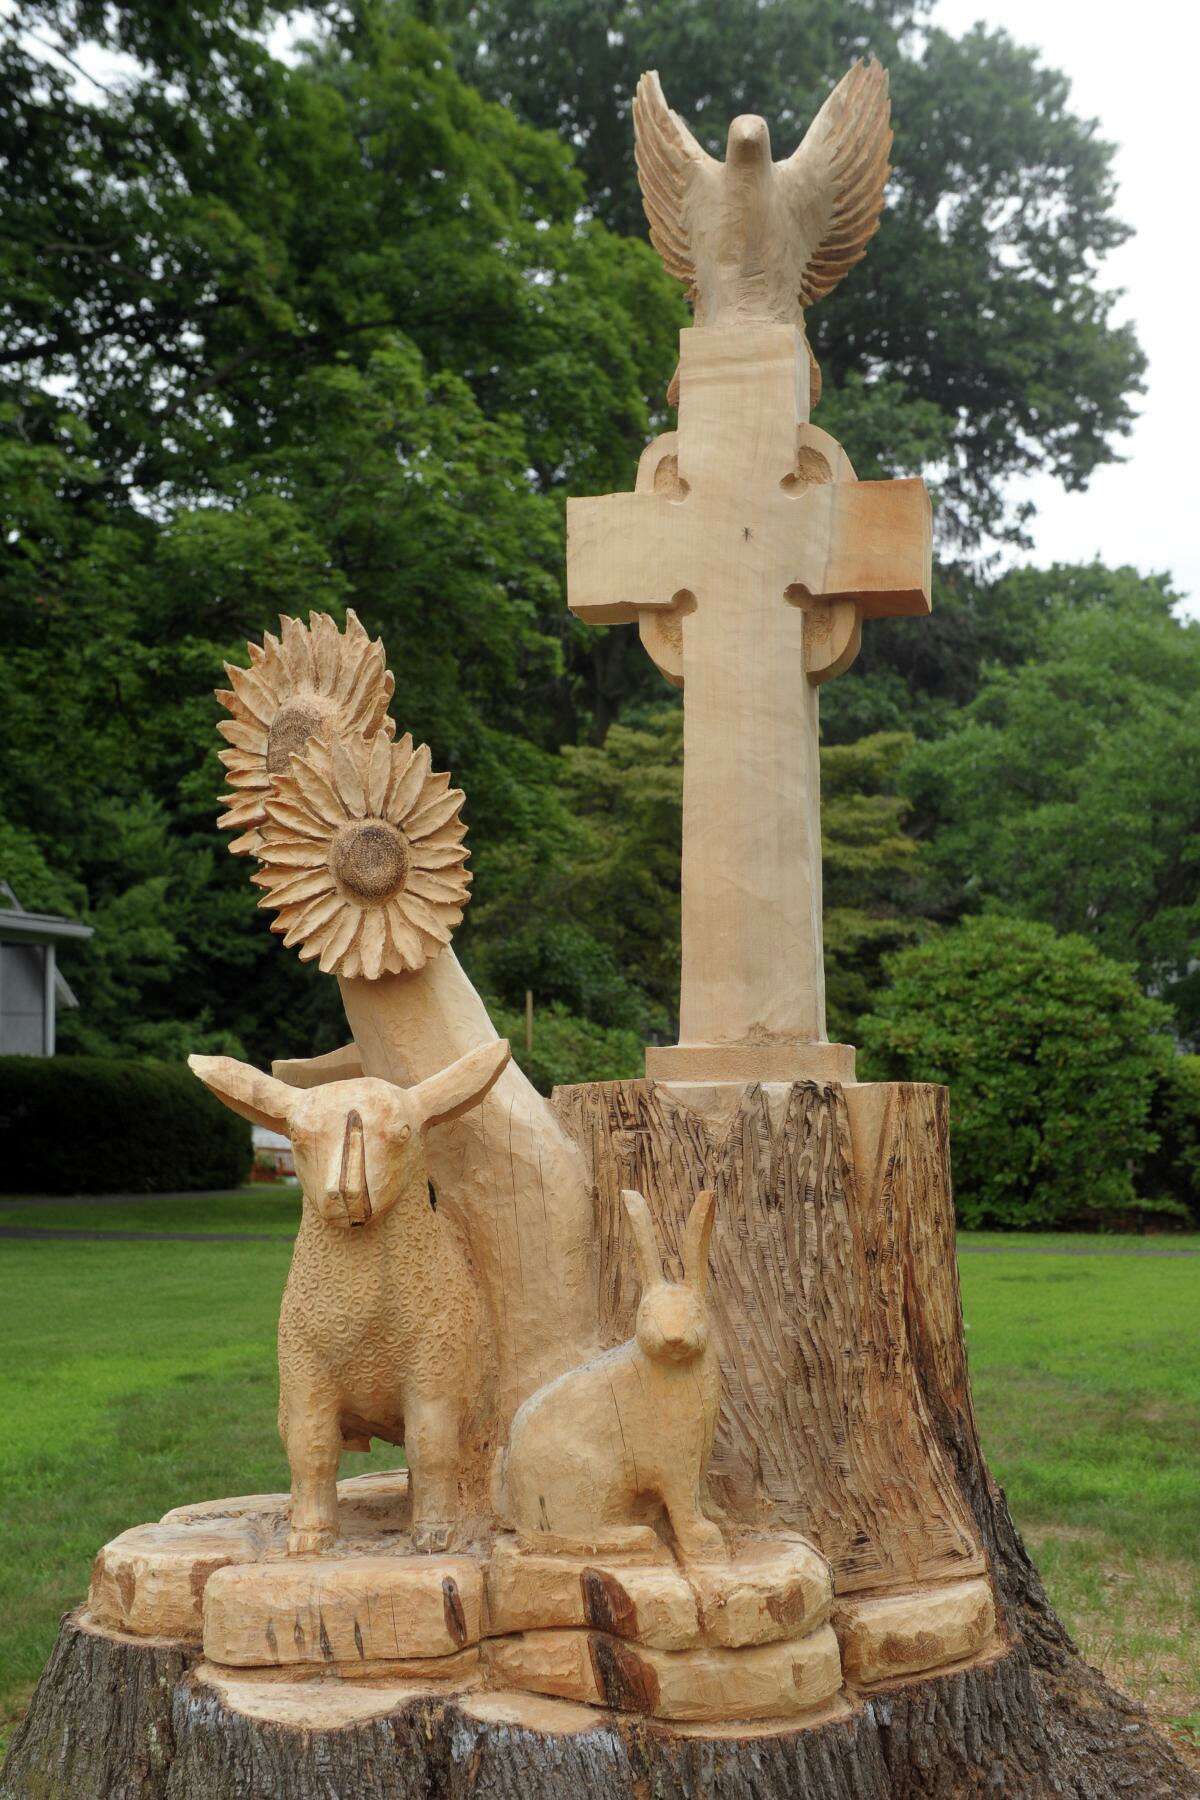 The new sculpture carved out of the truck of an old Maple tree in front Trinity Episcopal Church, in the Nichols neighborhood of Trumbull on Friday.